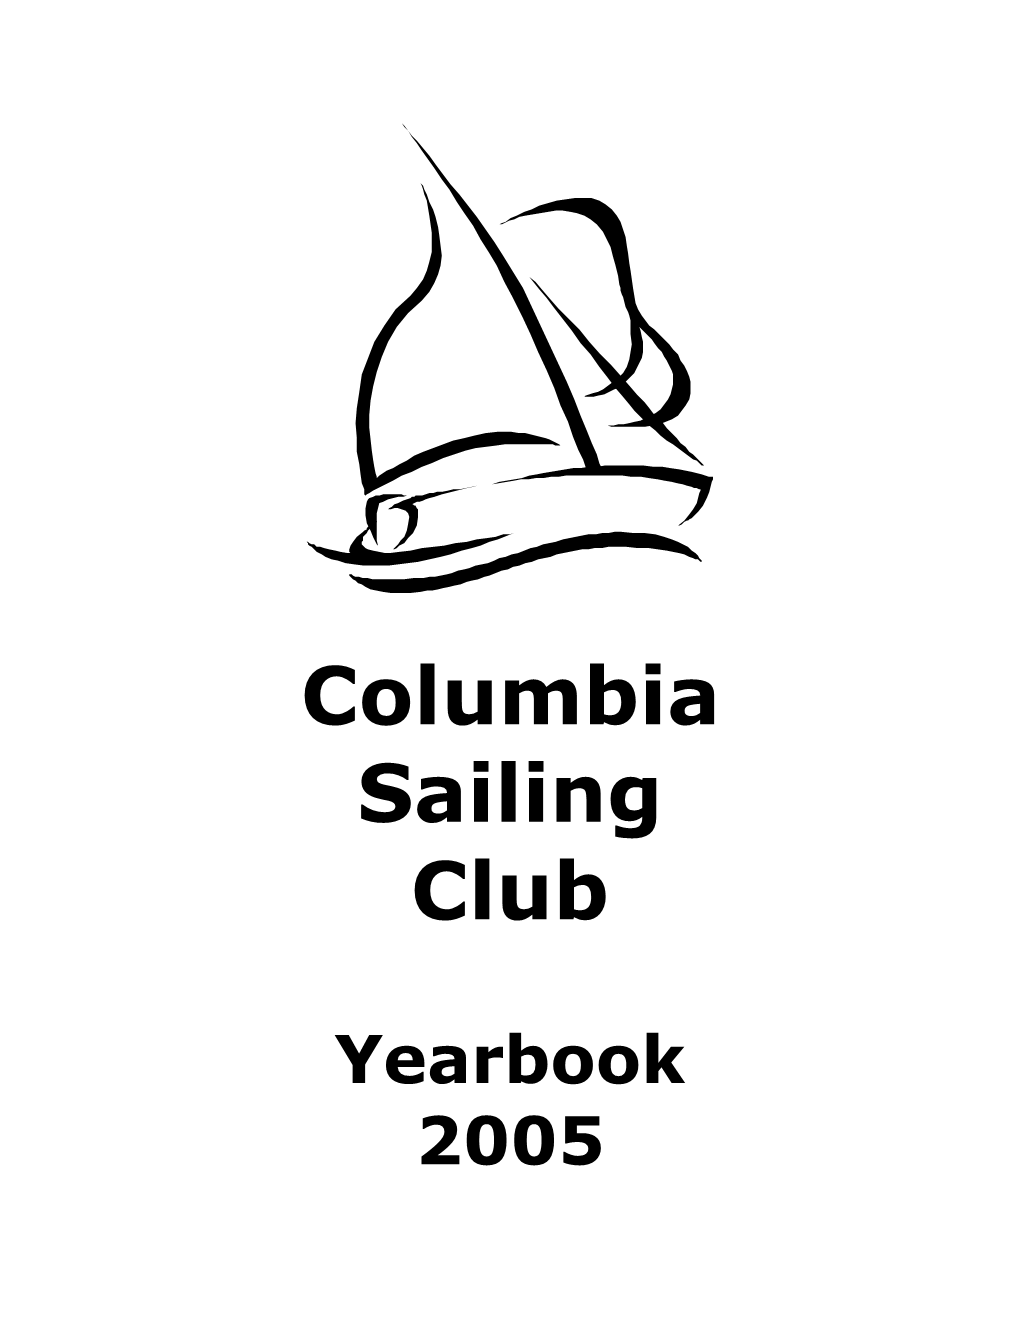 Yearbook 2005 COLUMBIA SAILING CLUB Founded July 17, 1957